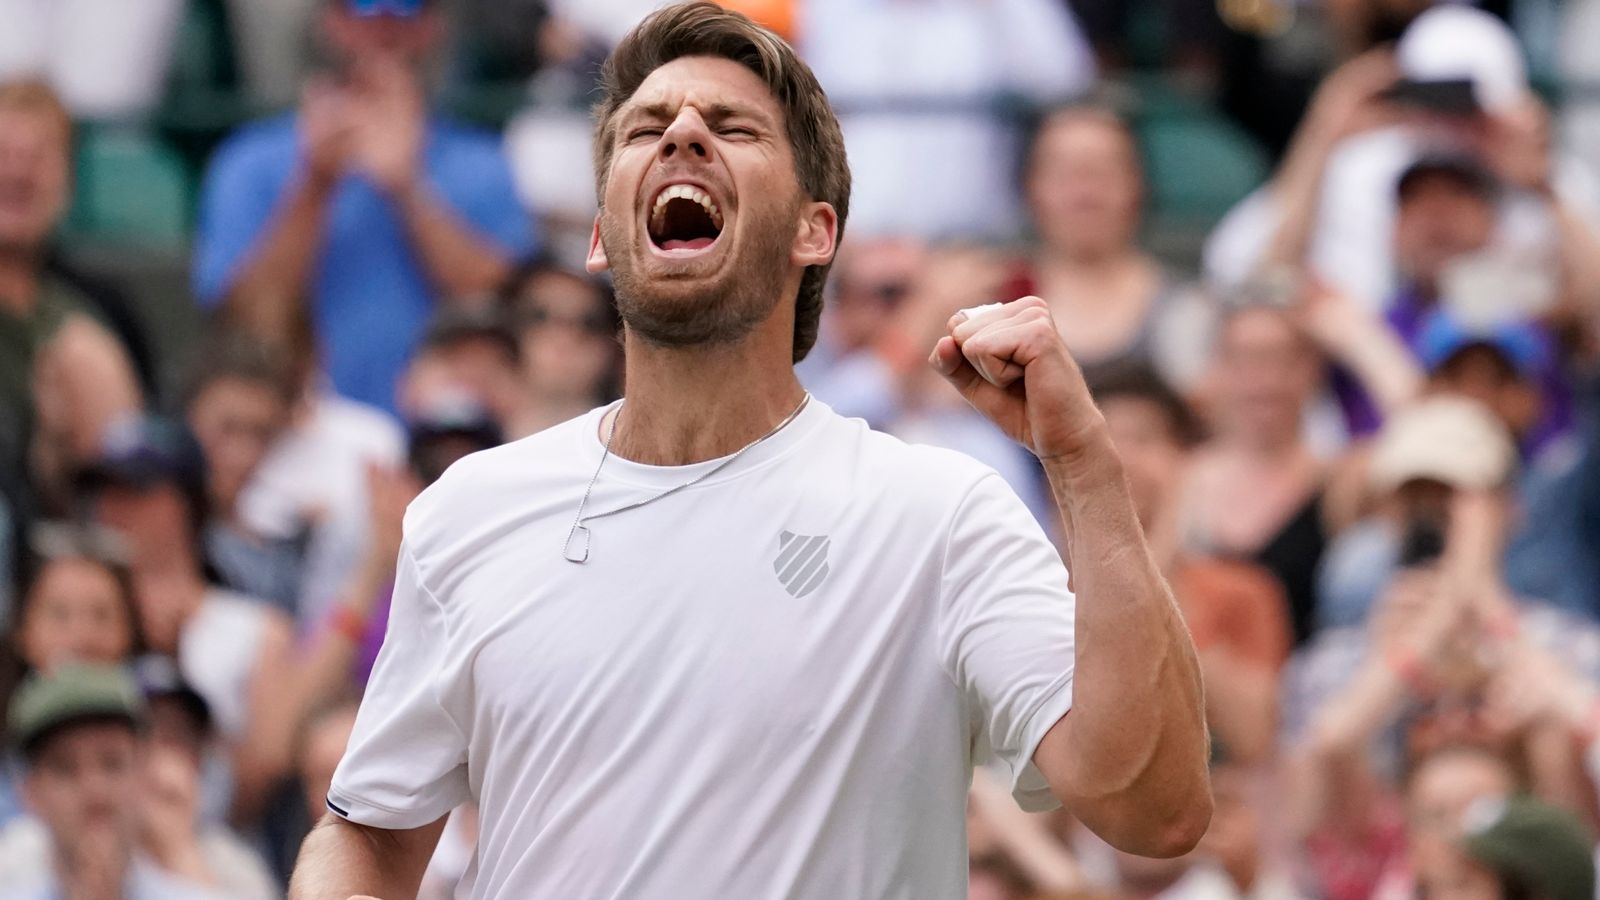 Wimbledon: Cameron Norrie charges into quarter-finals but Heather Watson bows out |  Tennis News